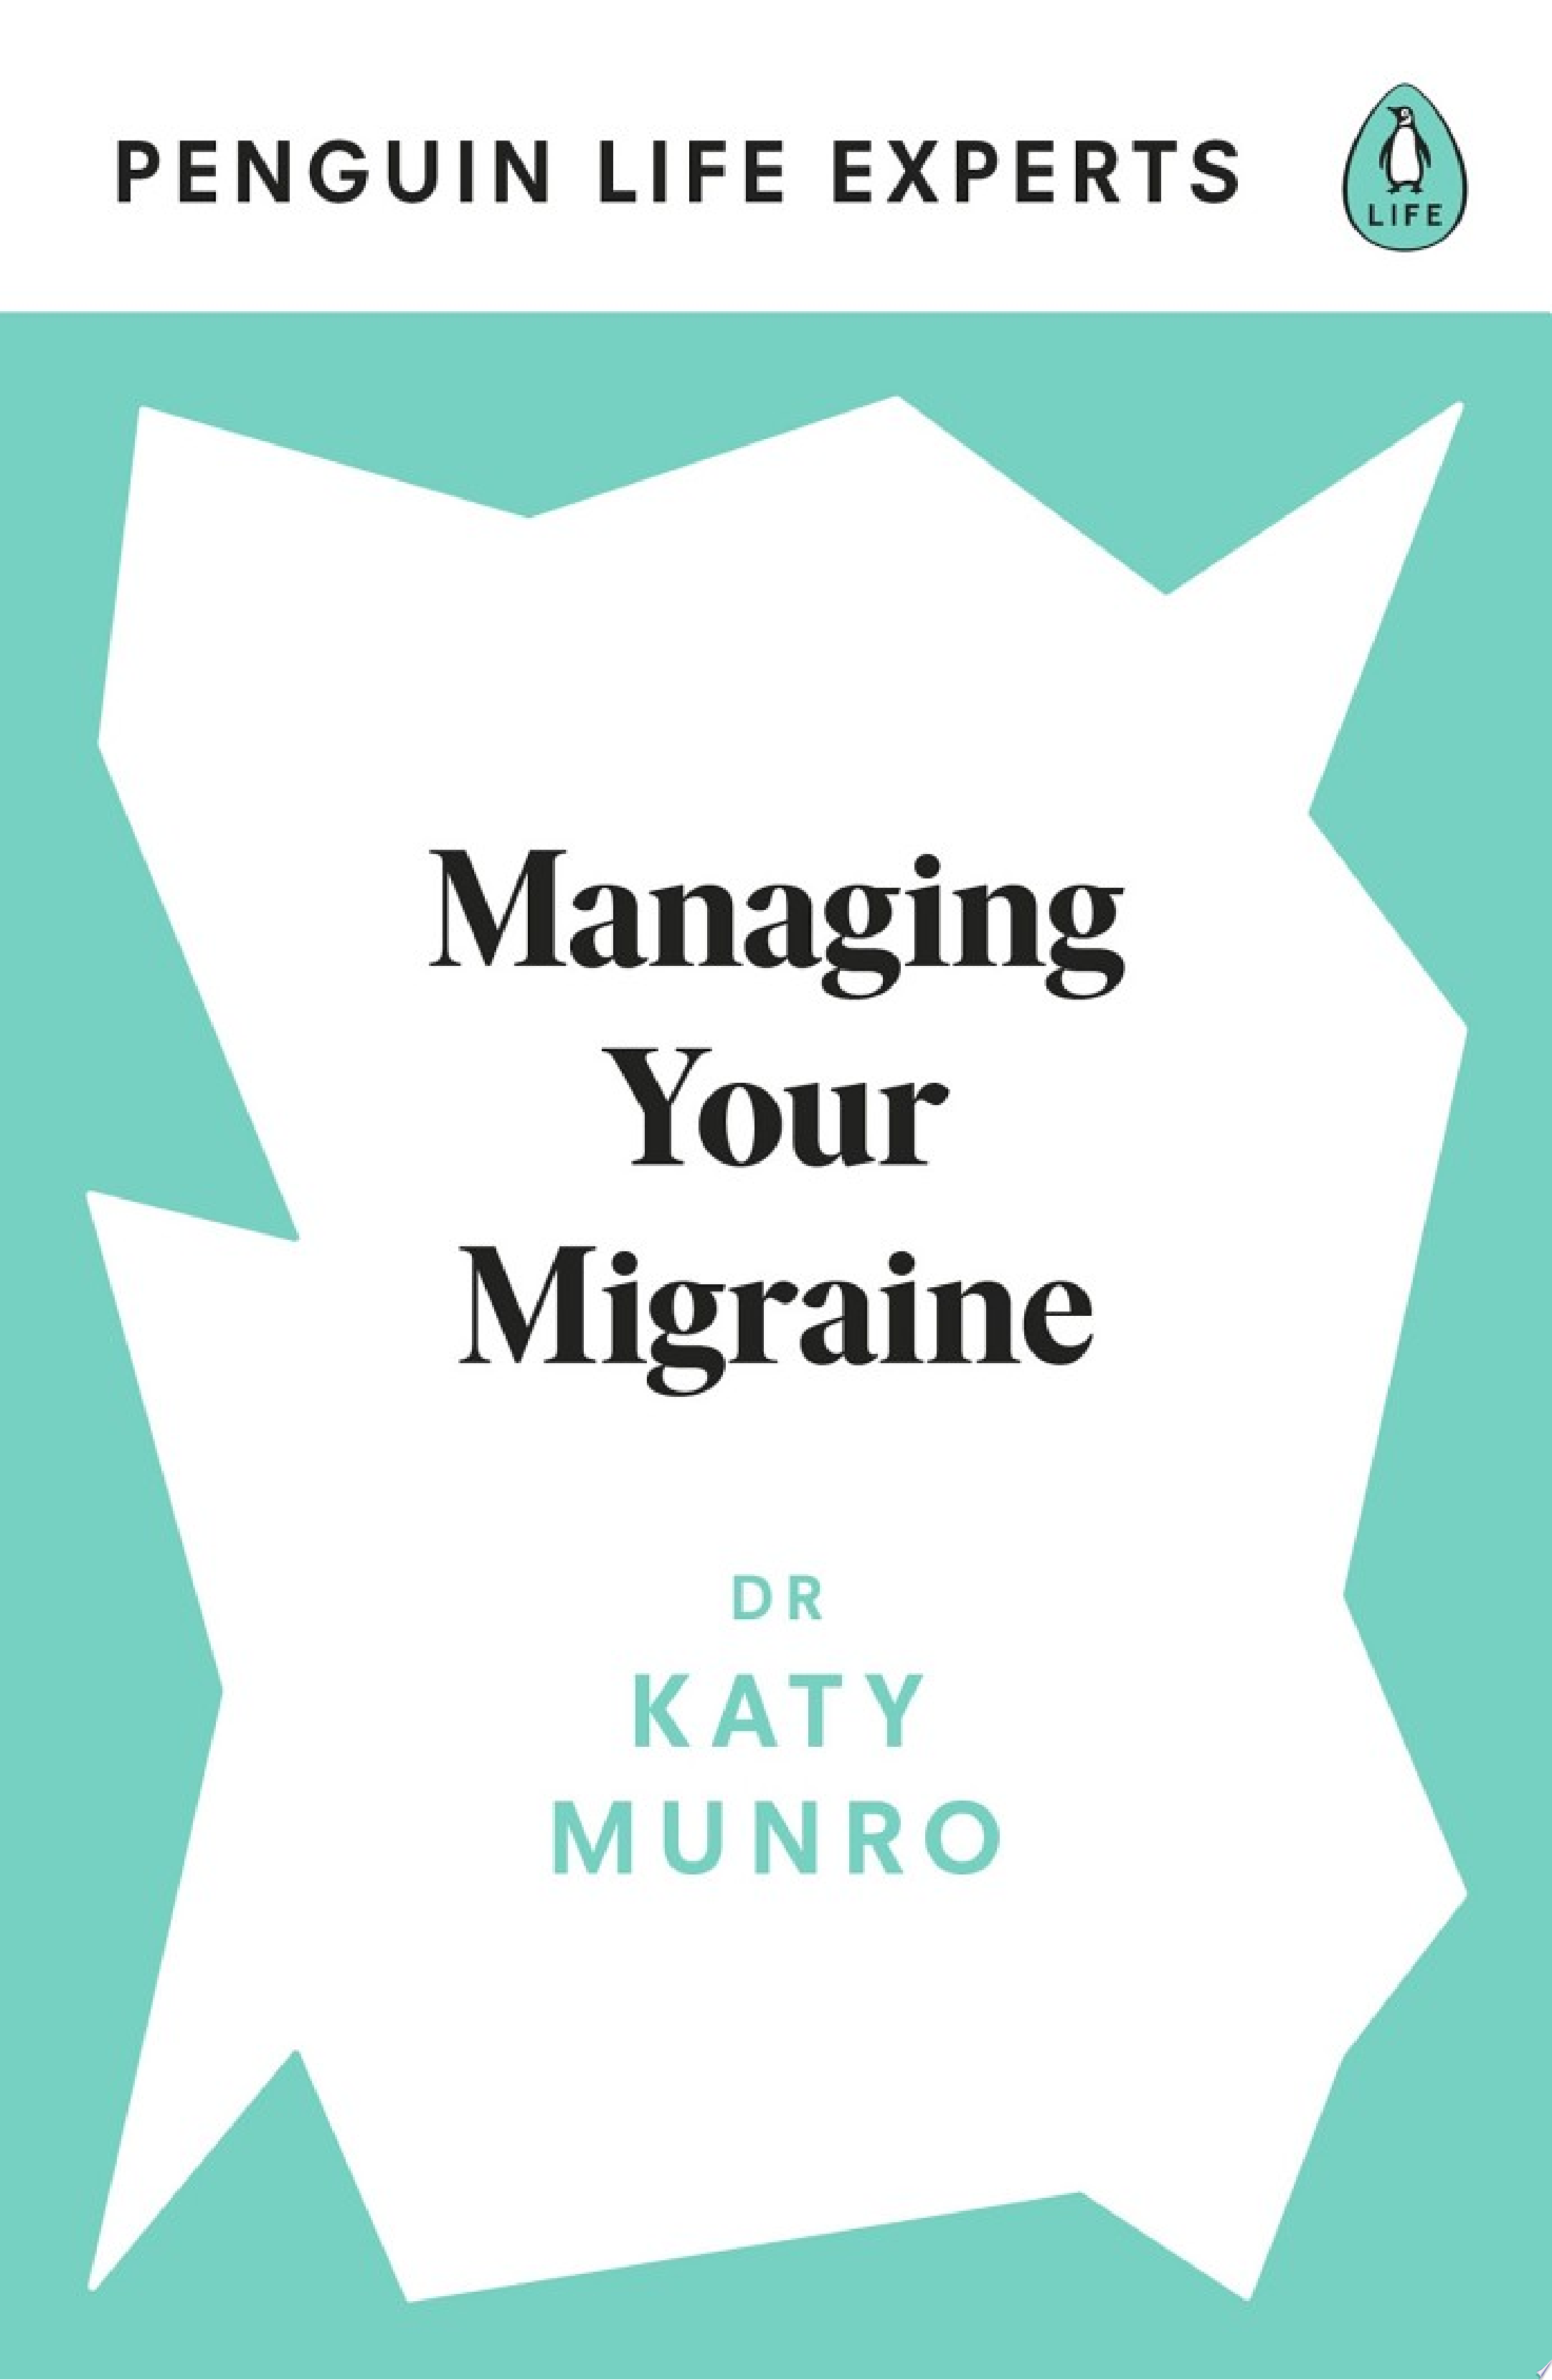 Image for "Managing Your Migraine"